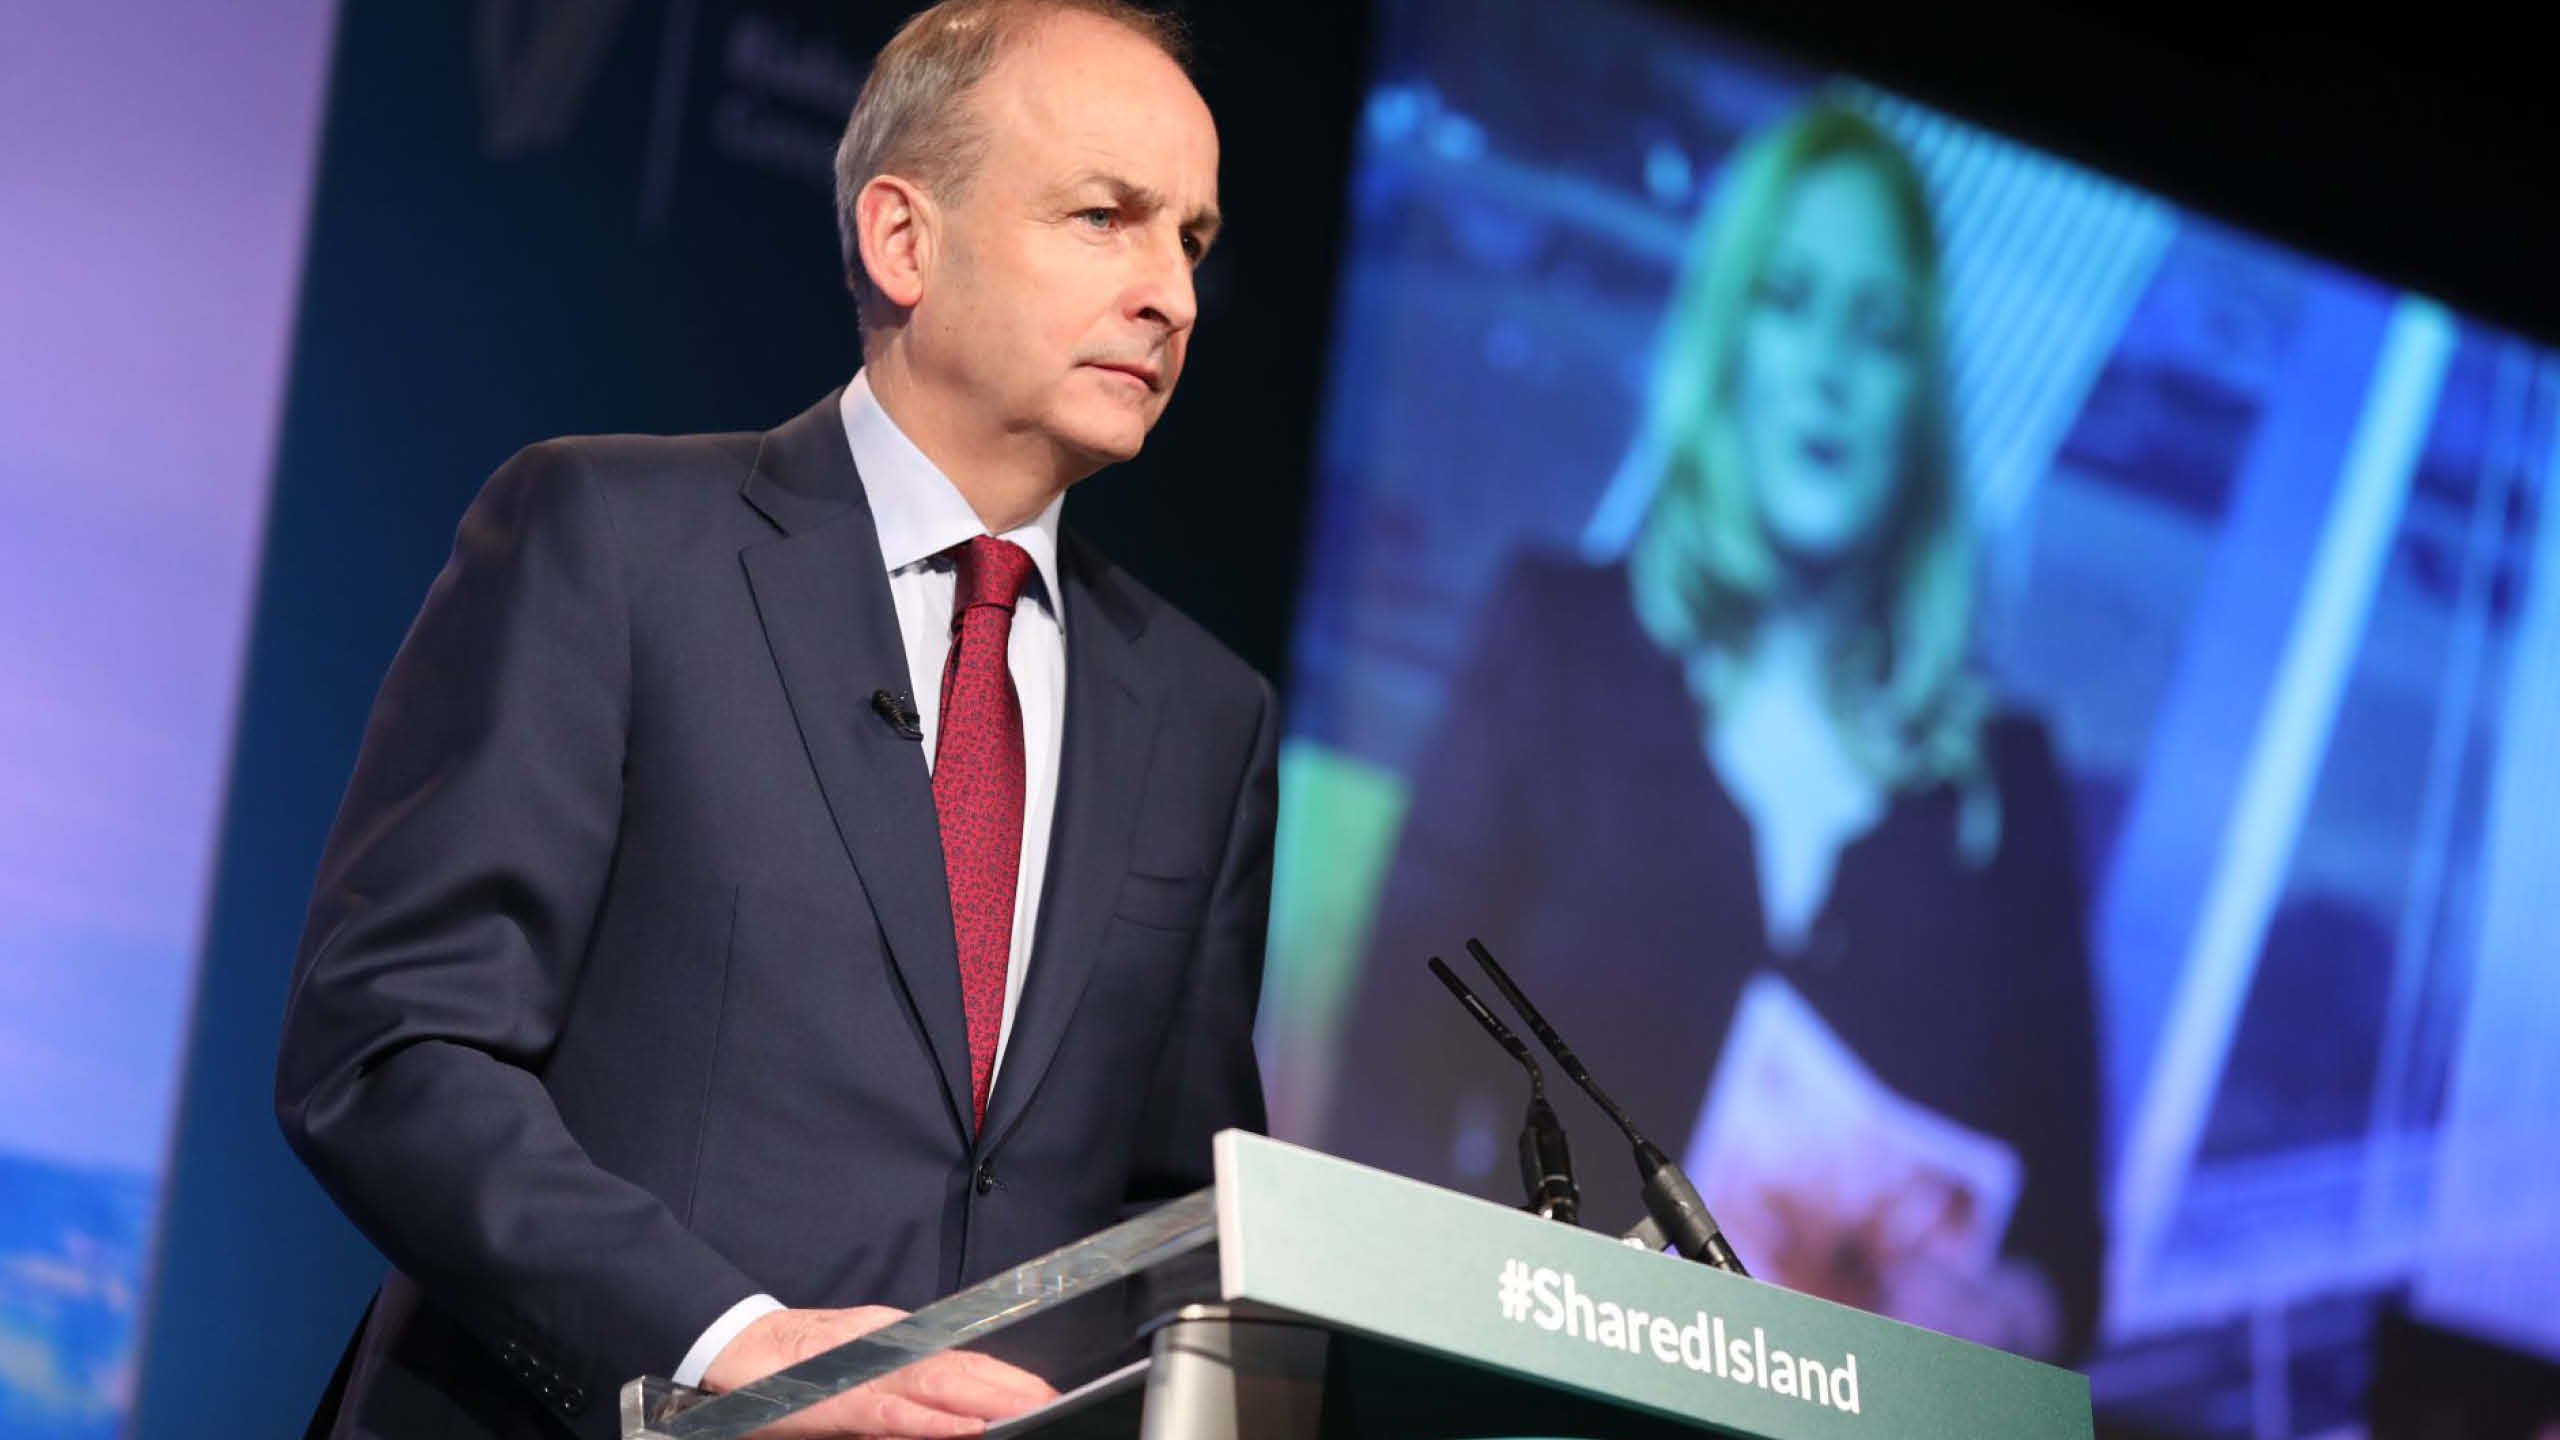 Taoiseach's keynote address on the next phase of the Government’s Shared Island initiative